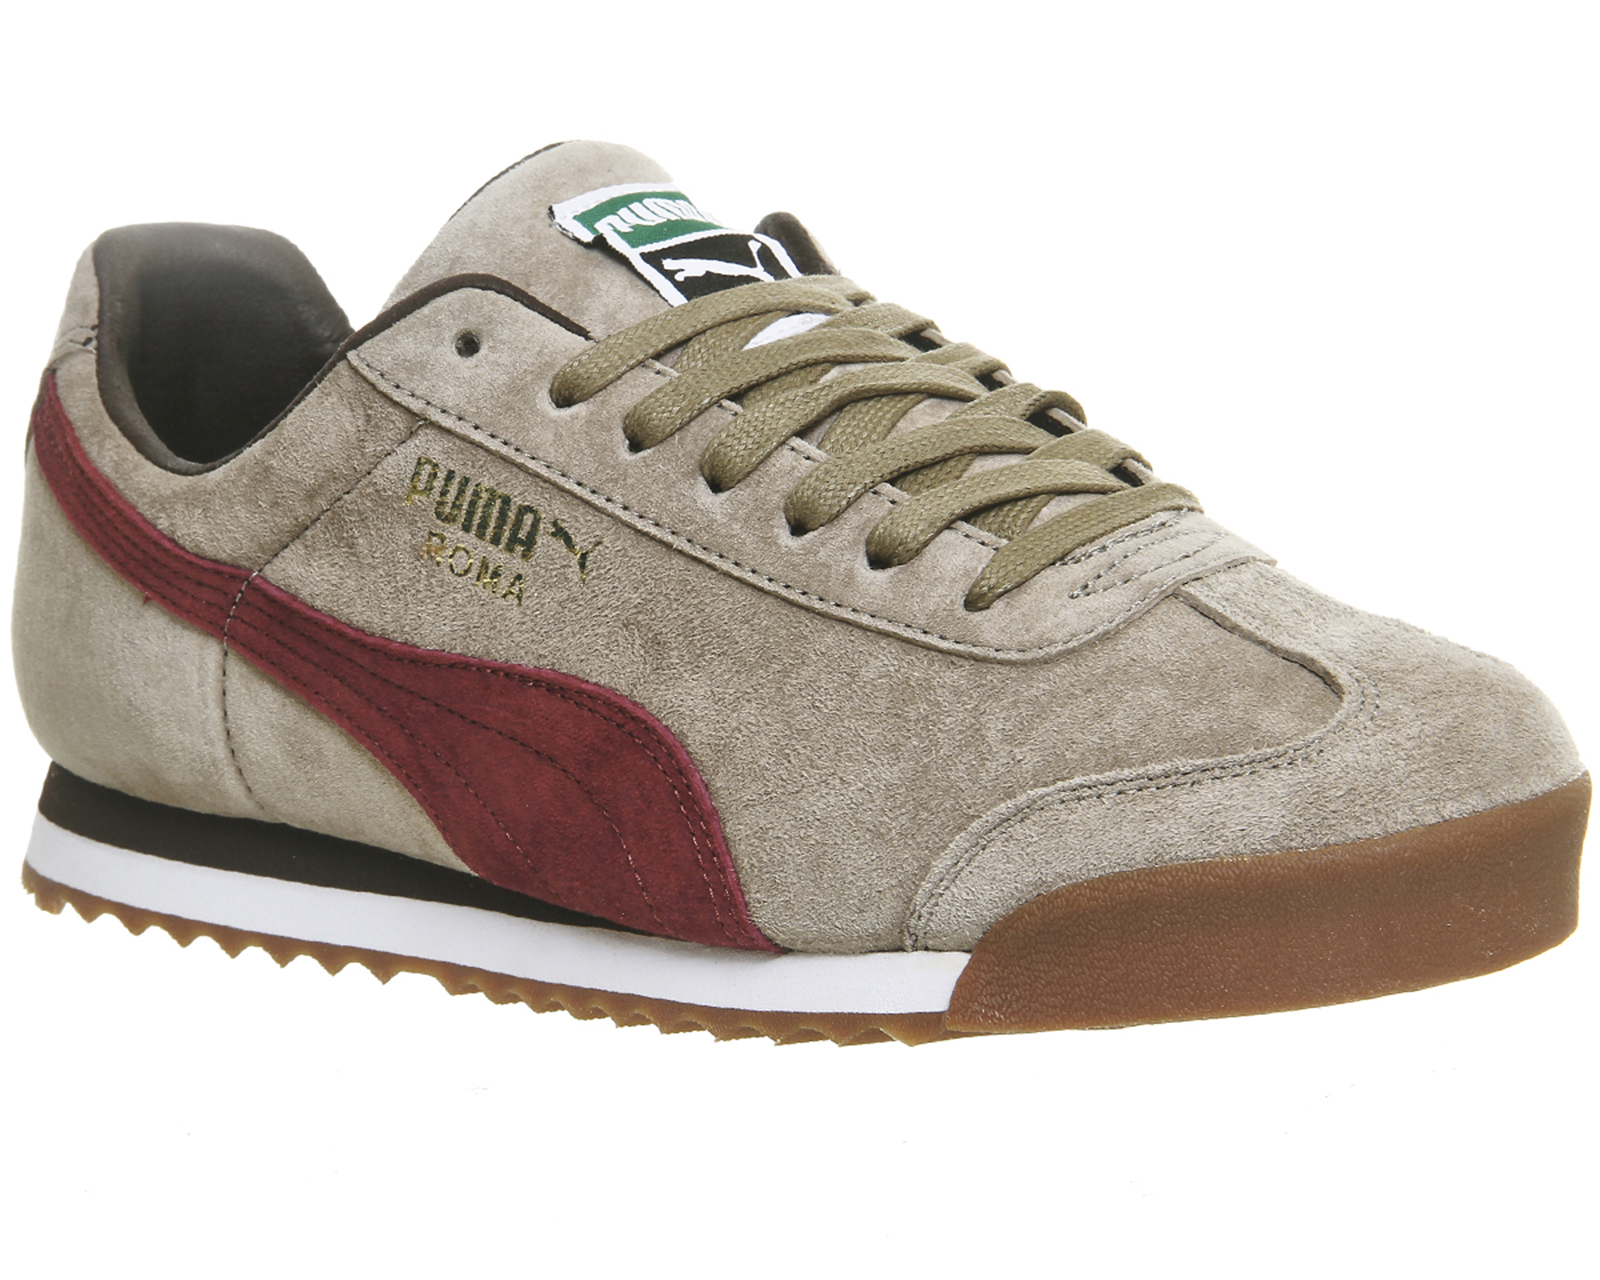 Puma Roma Beige Maroon Suede - His trainers